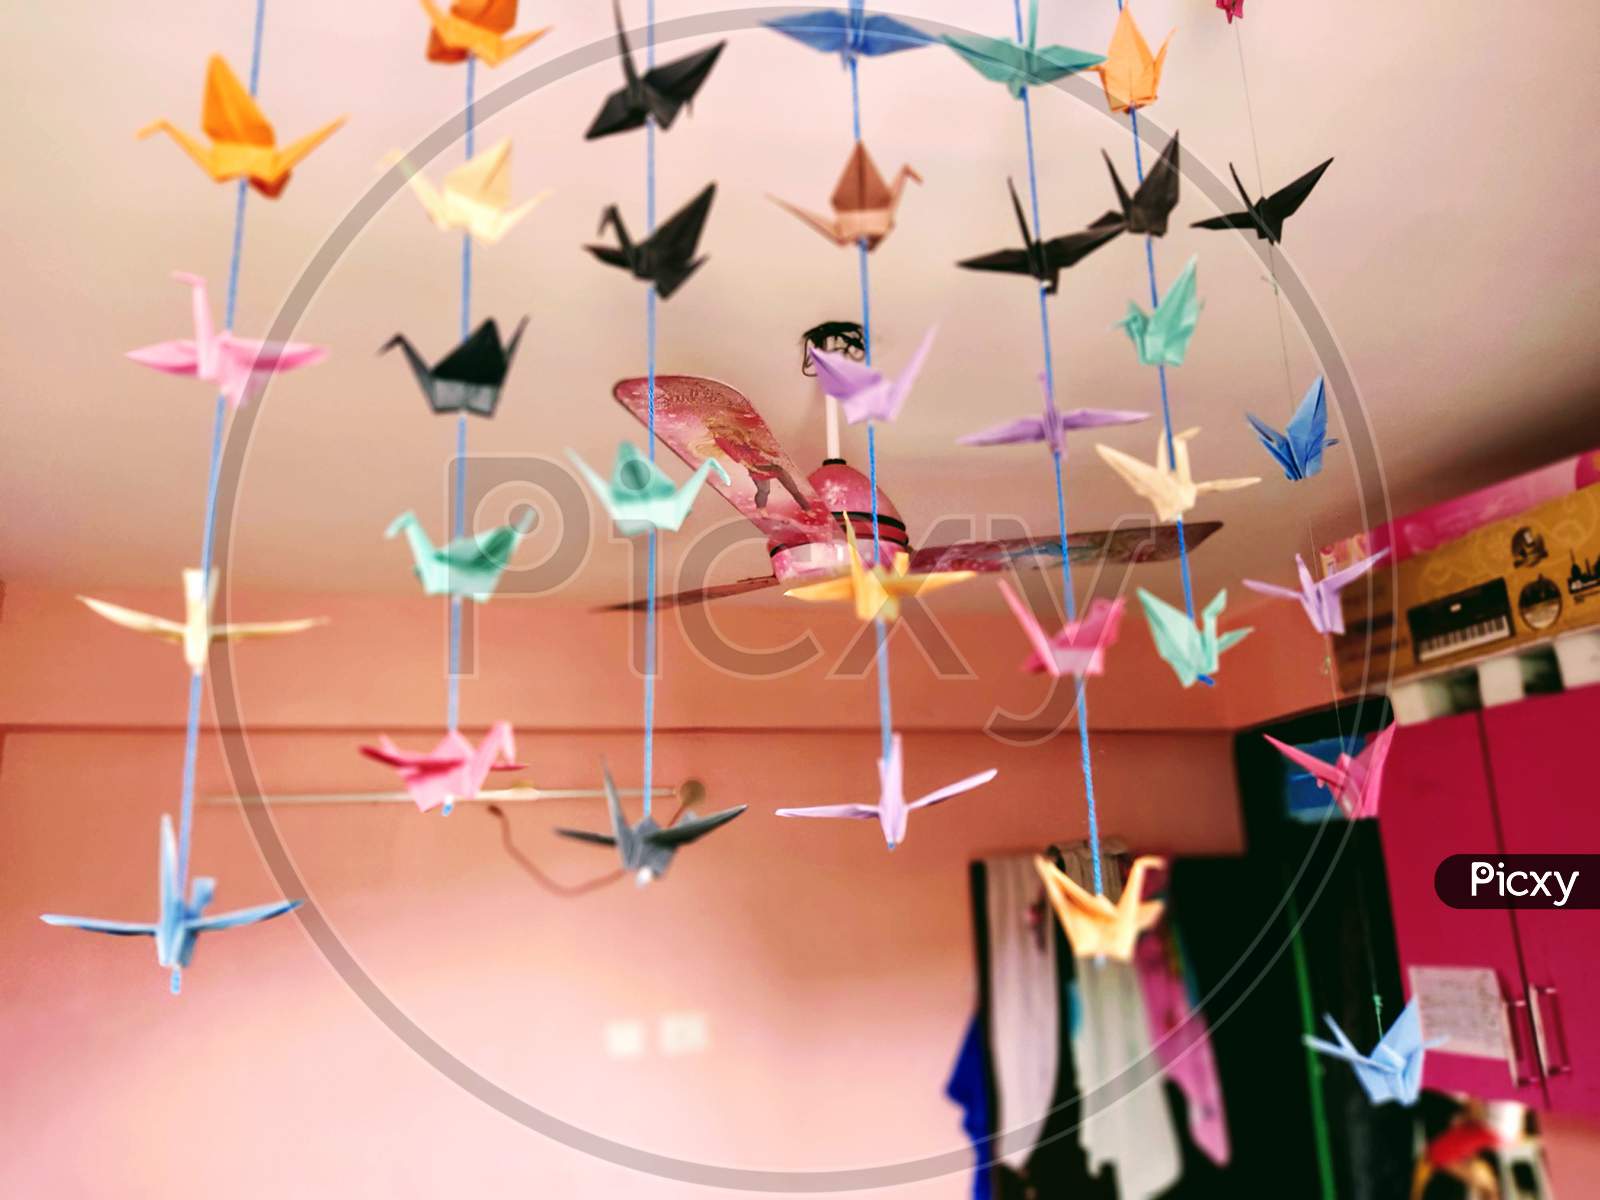 Ceiling Fan designed for kids room surrounded by bird toy made by colored paper